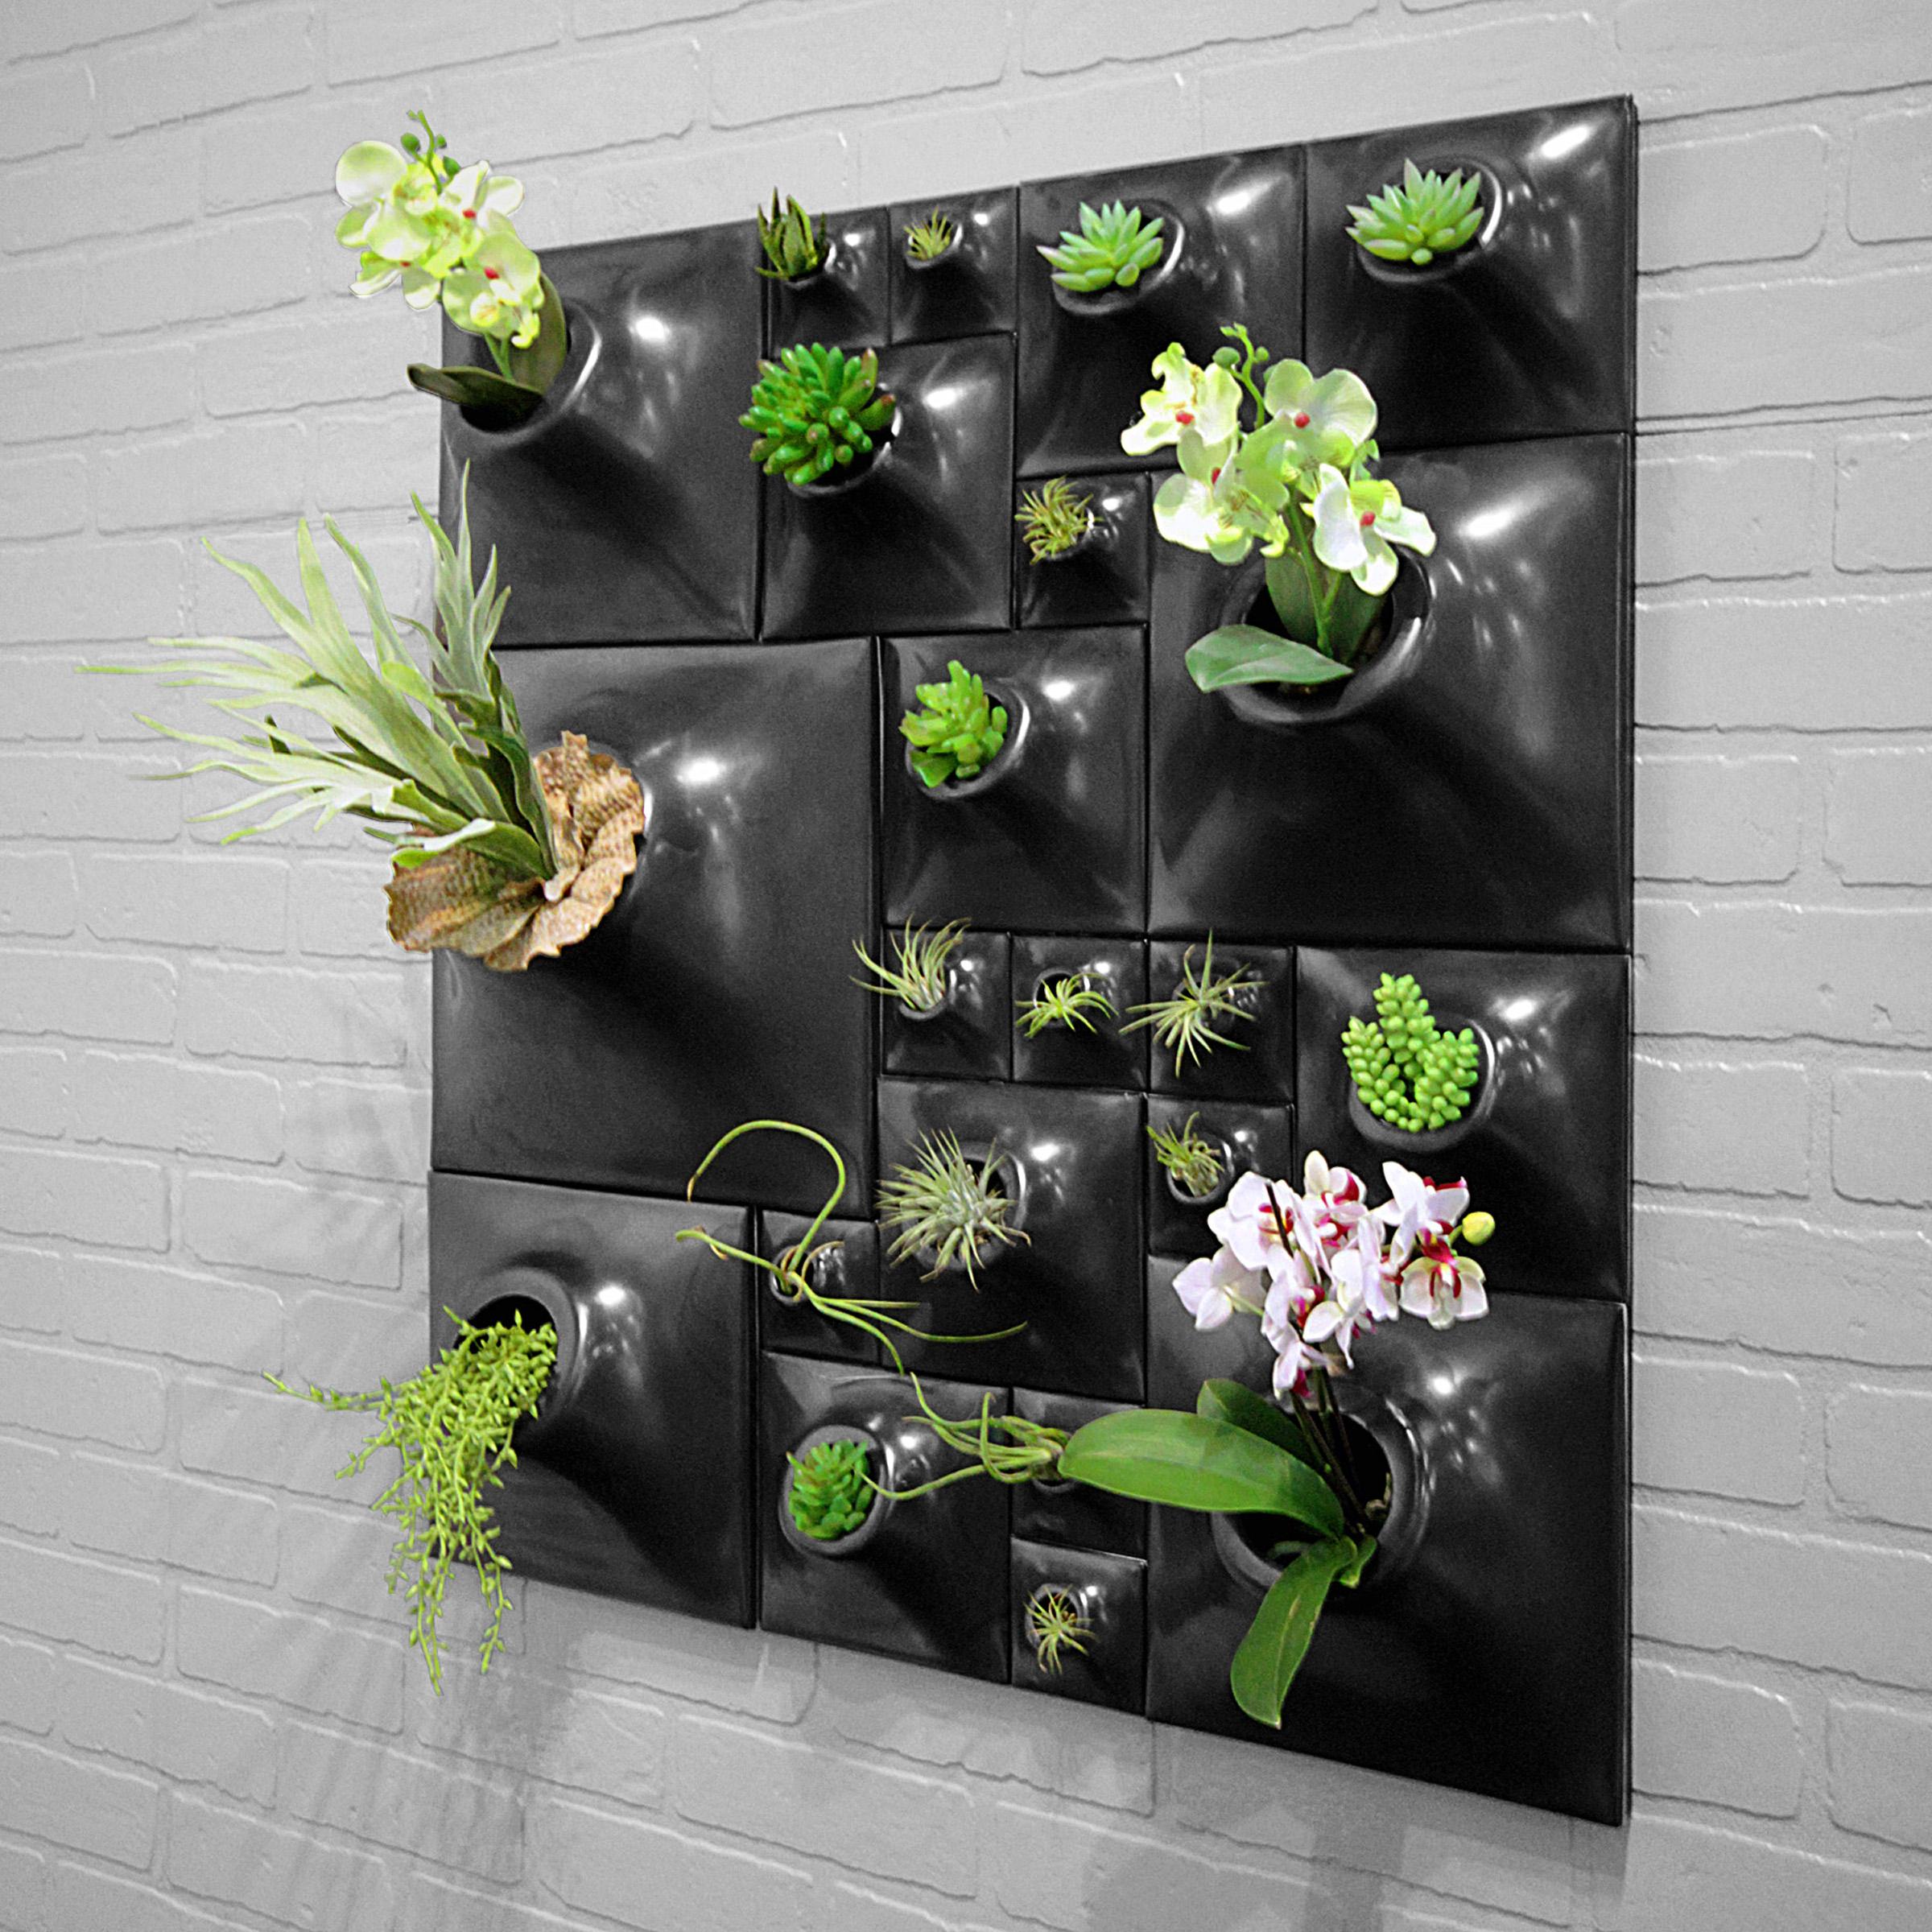 Modern Greenwall Sculpture, Plant Wall Art, Biophilic Wall Decor, Price / Sq Ft For Sale 6